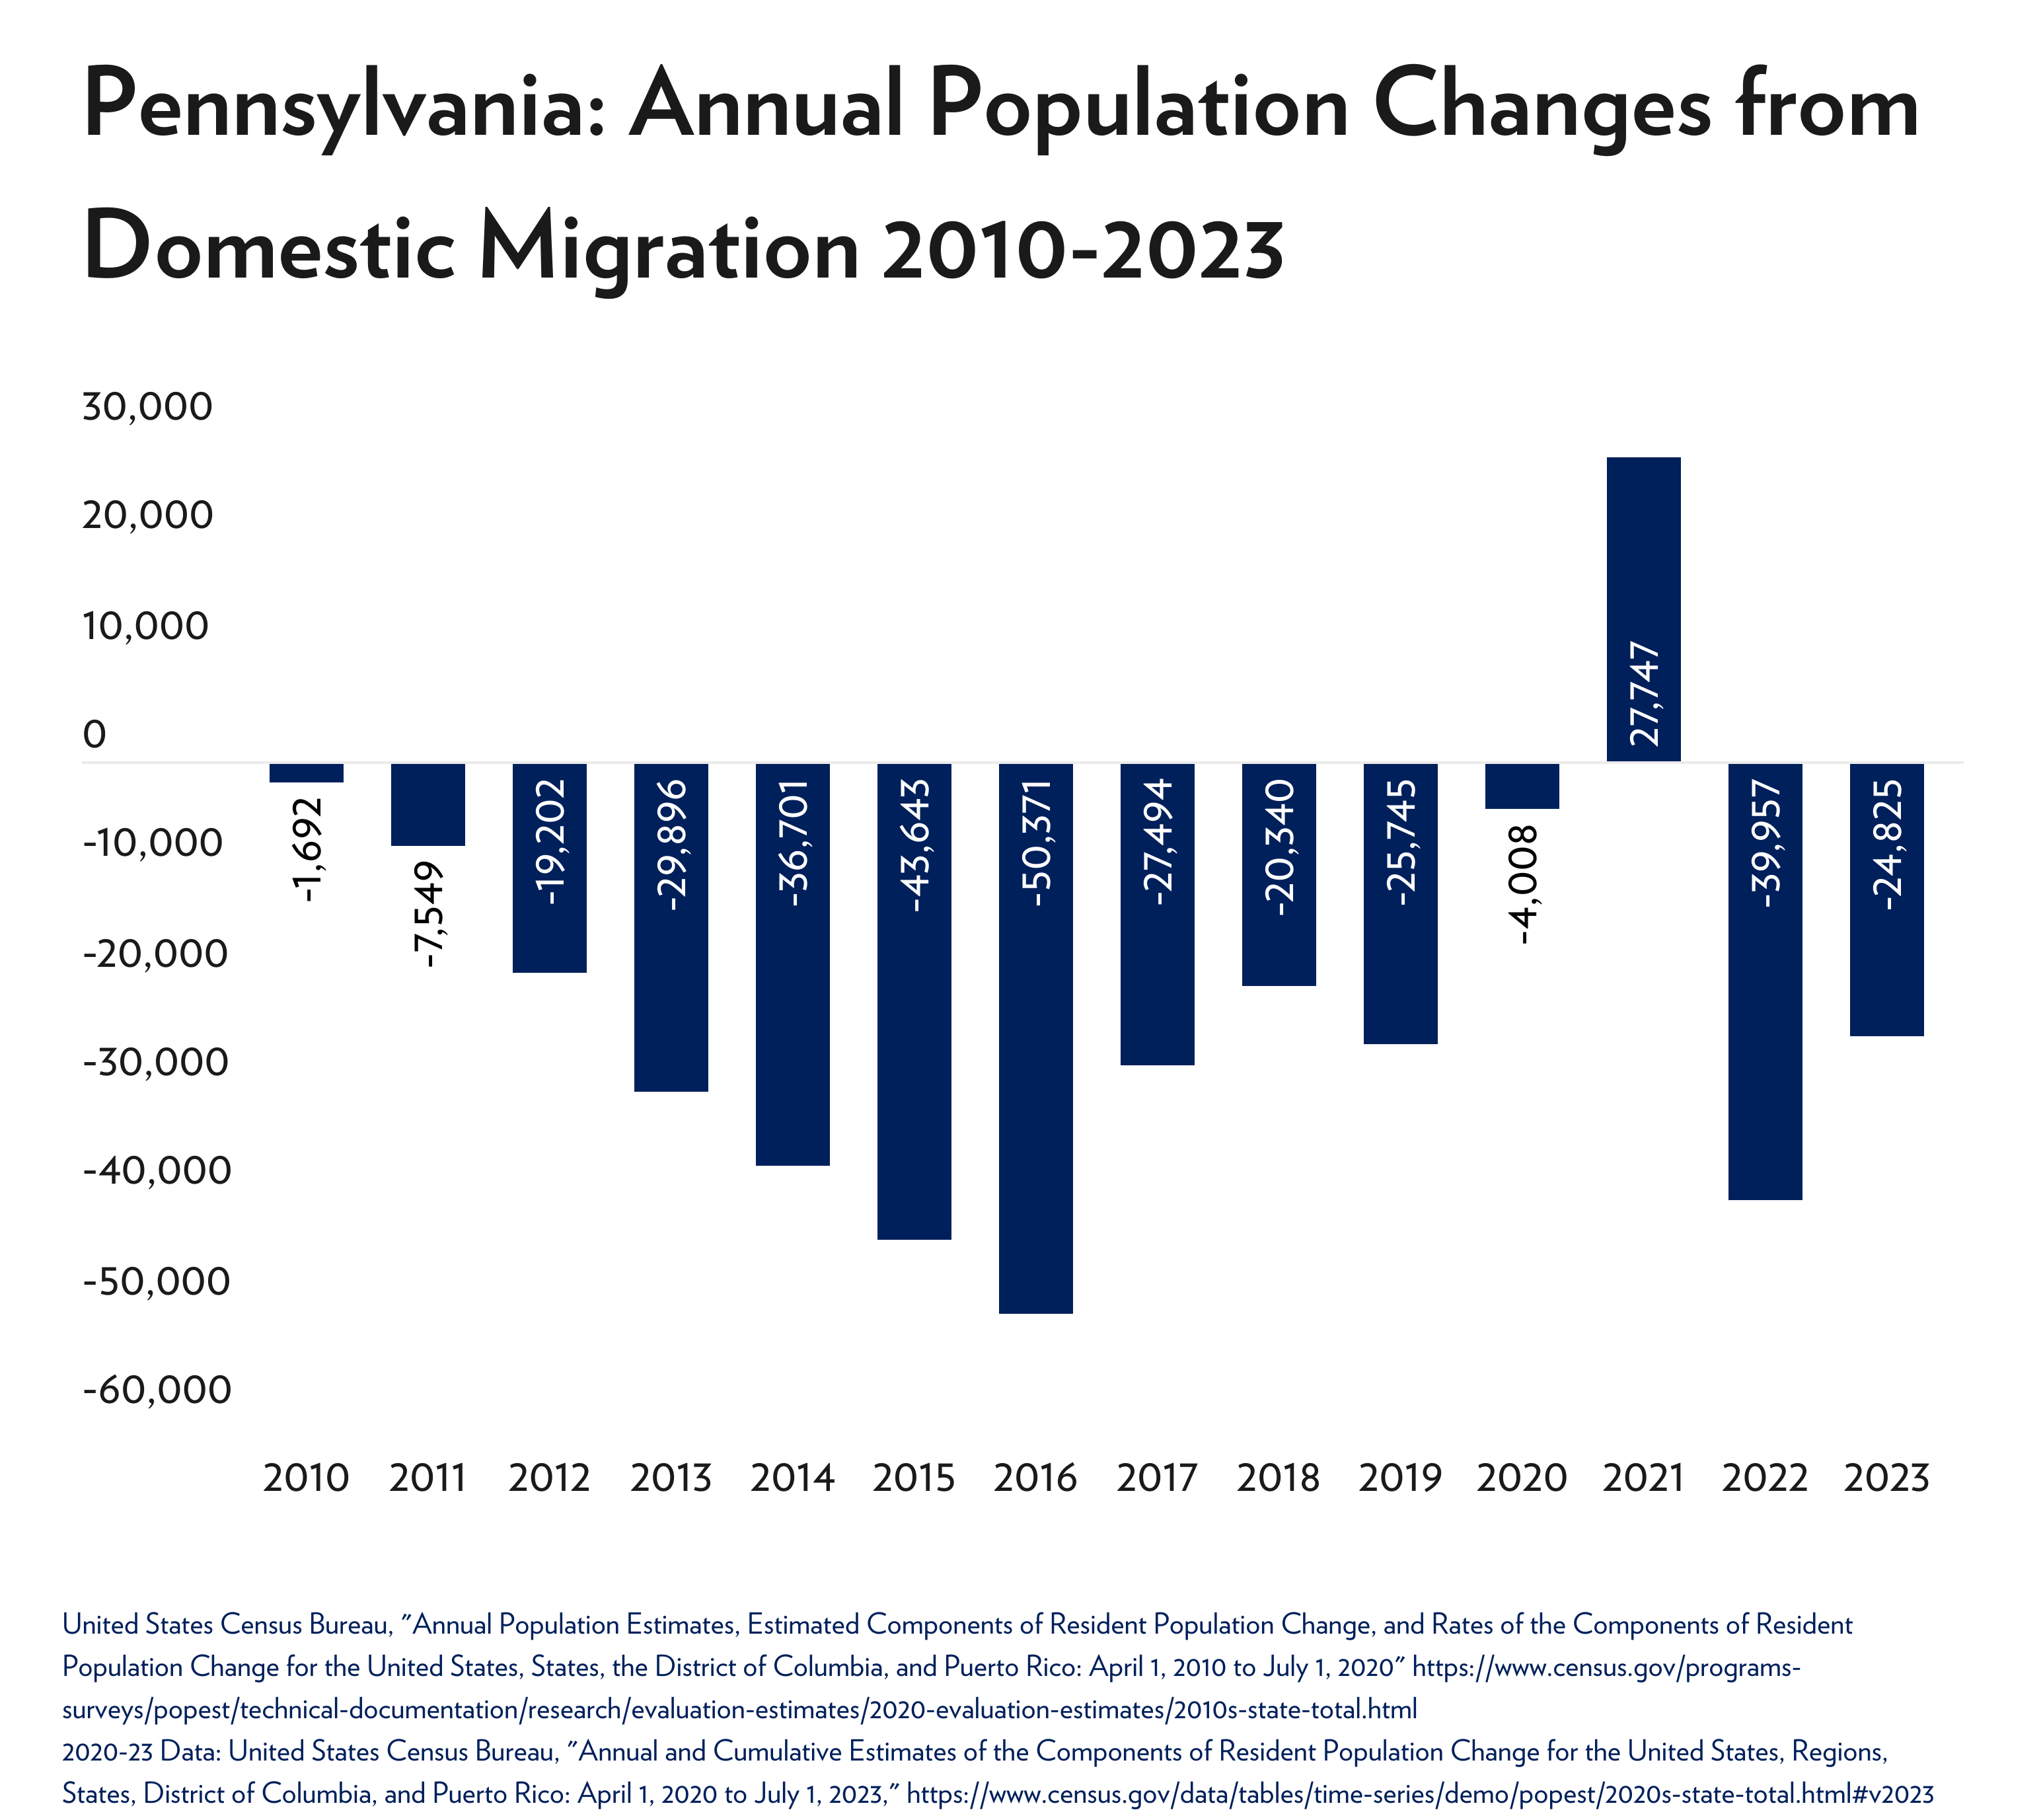 pa-population-changes-from-domestic-migration-2010-2023[66].png